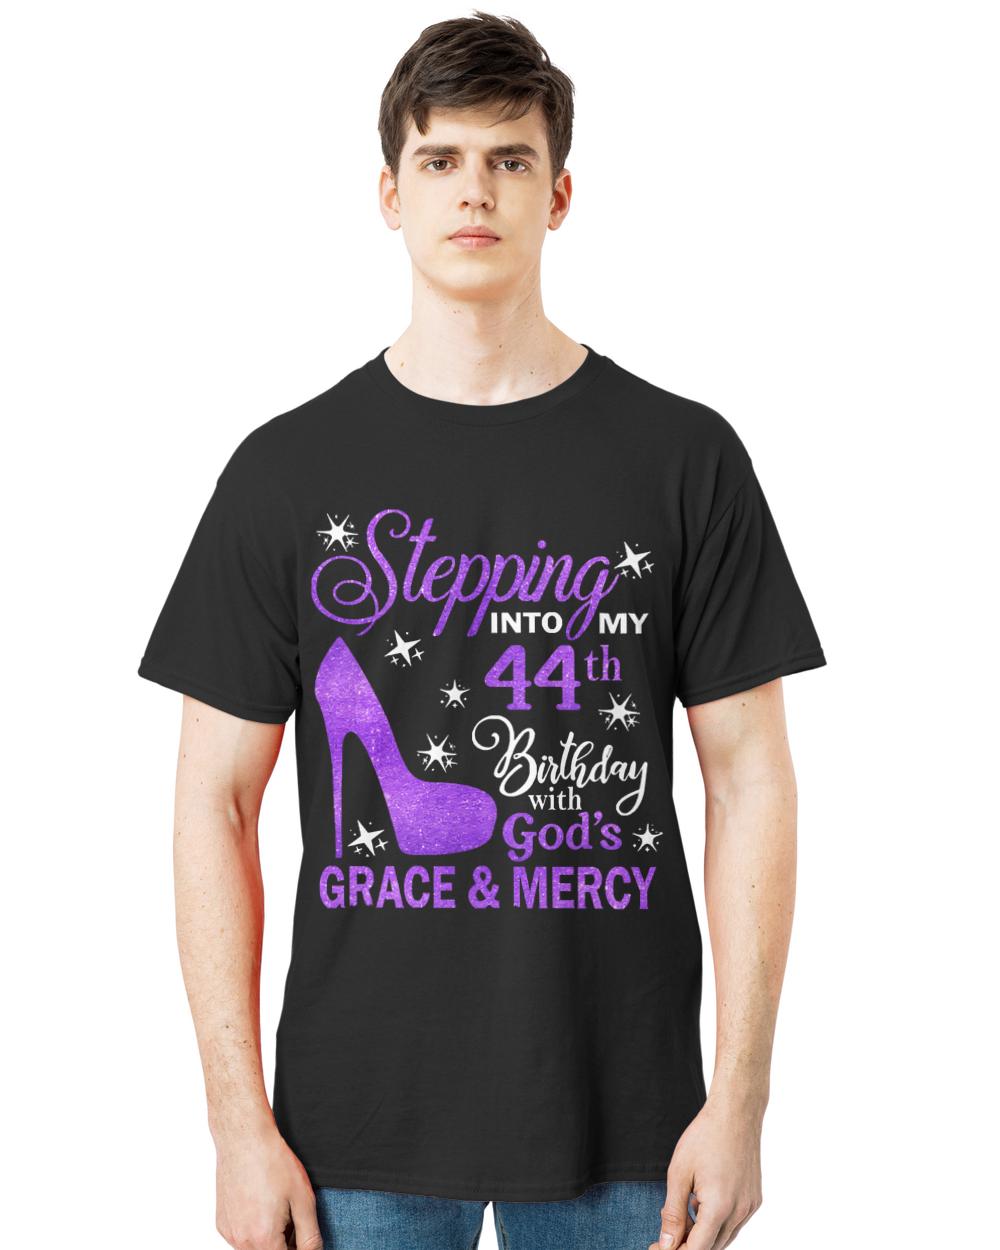 44th Birthday T-ShirtStepping Into My 44th Birthday With God's Grace & Mercy Bday T-Shirt (5)